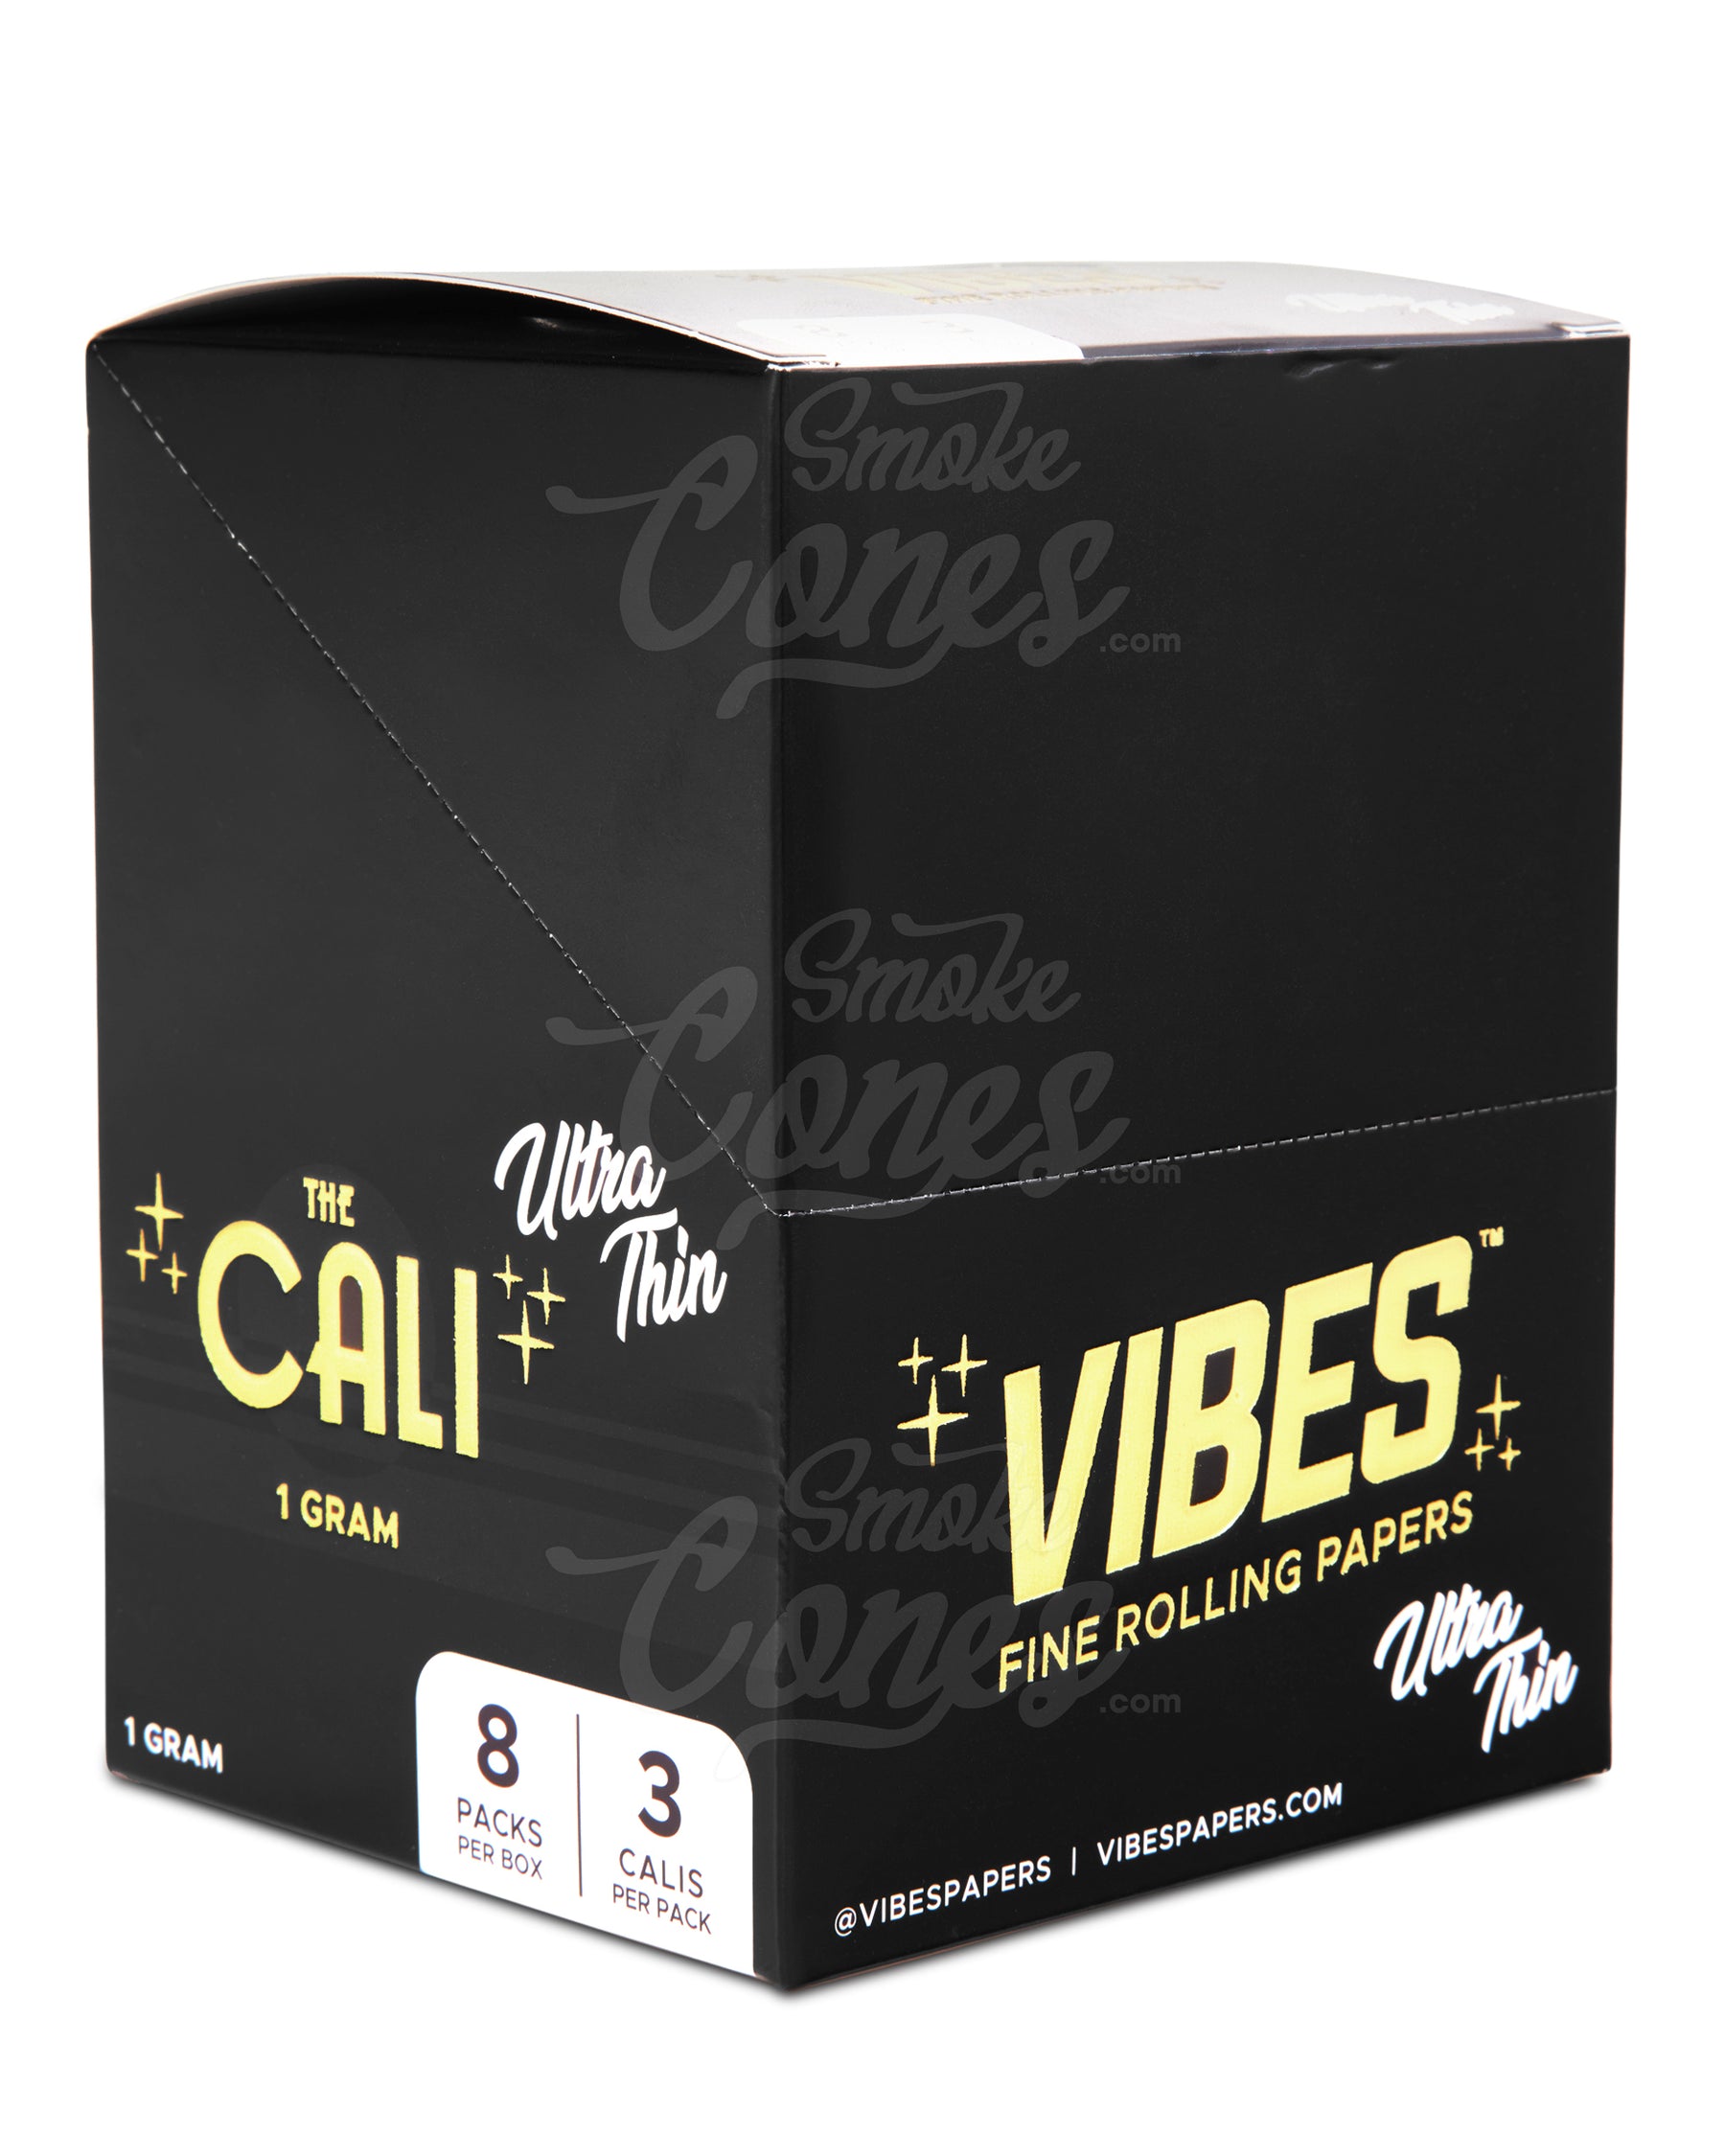 Vibes 110mm King Sized The Cali 1 Gram Pre Rolled Ultra Thin Paper Cones 24/Box